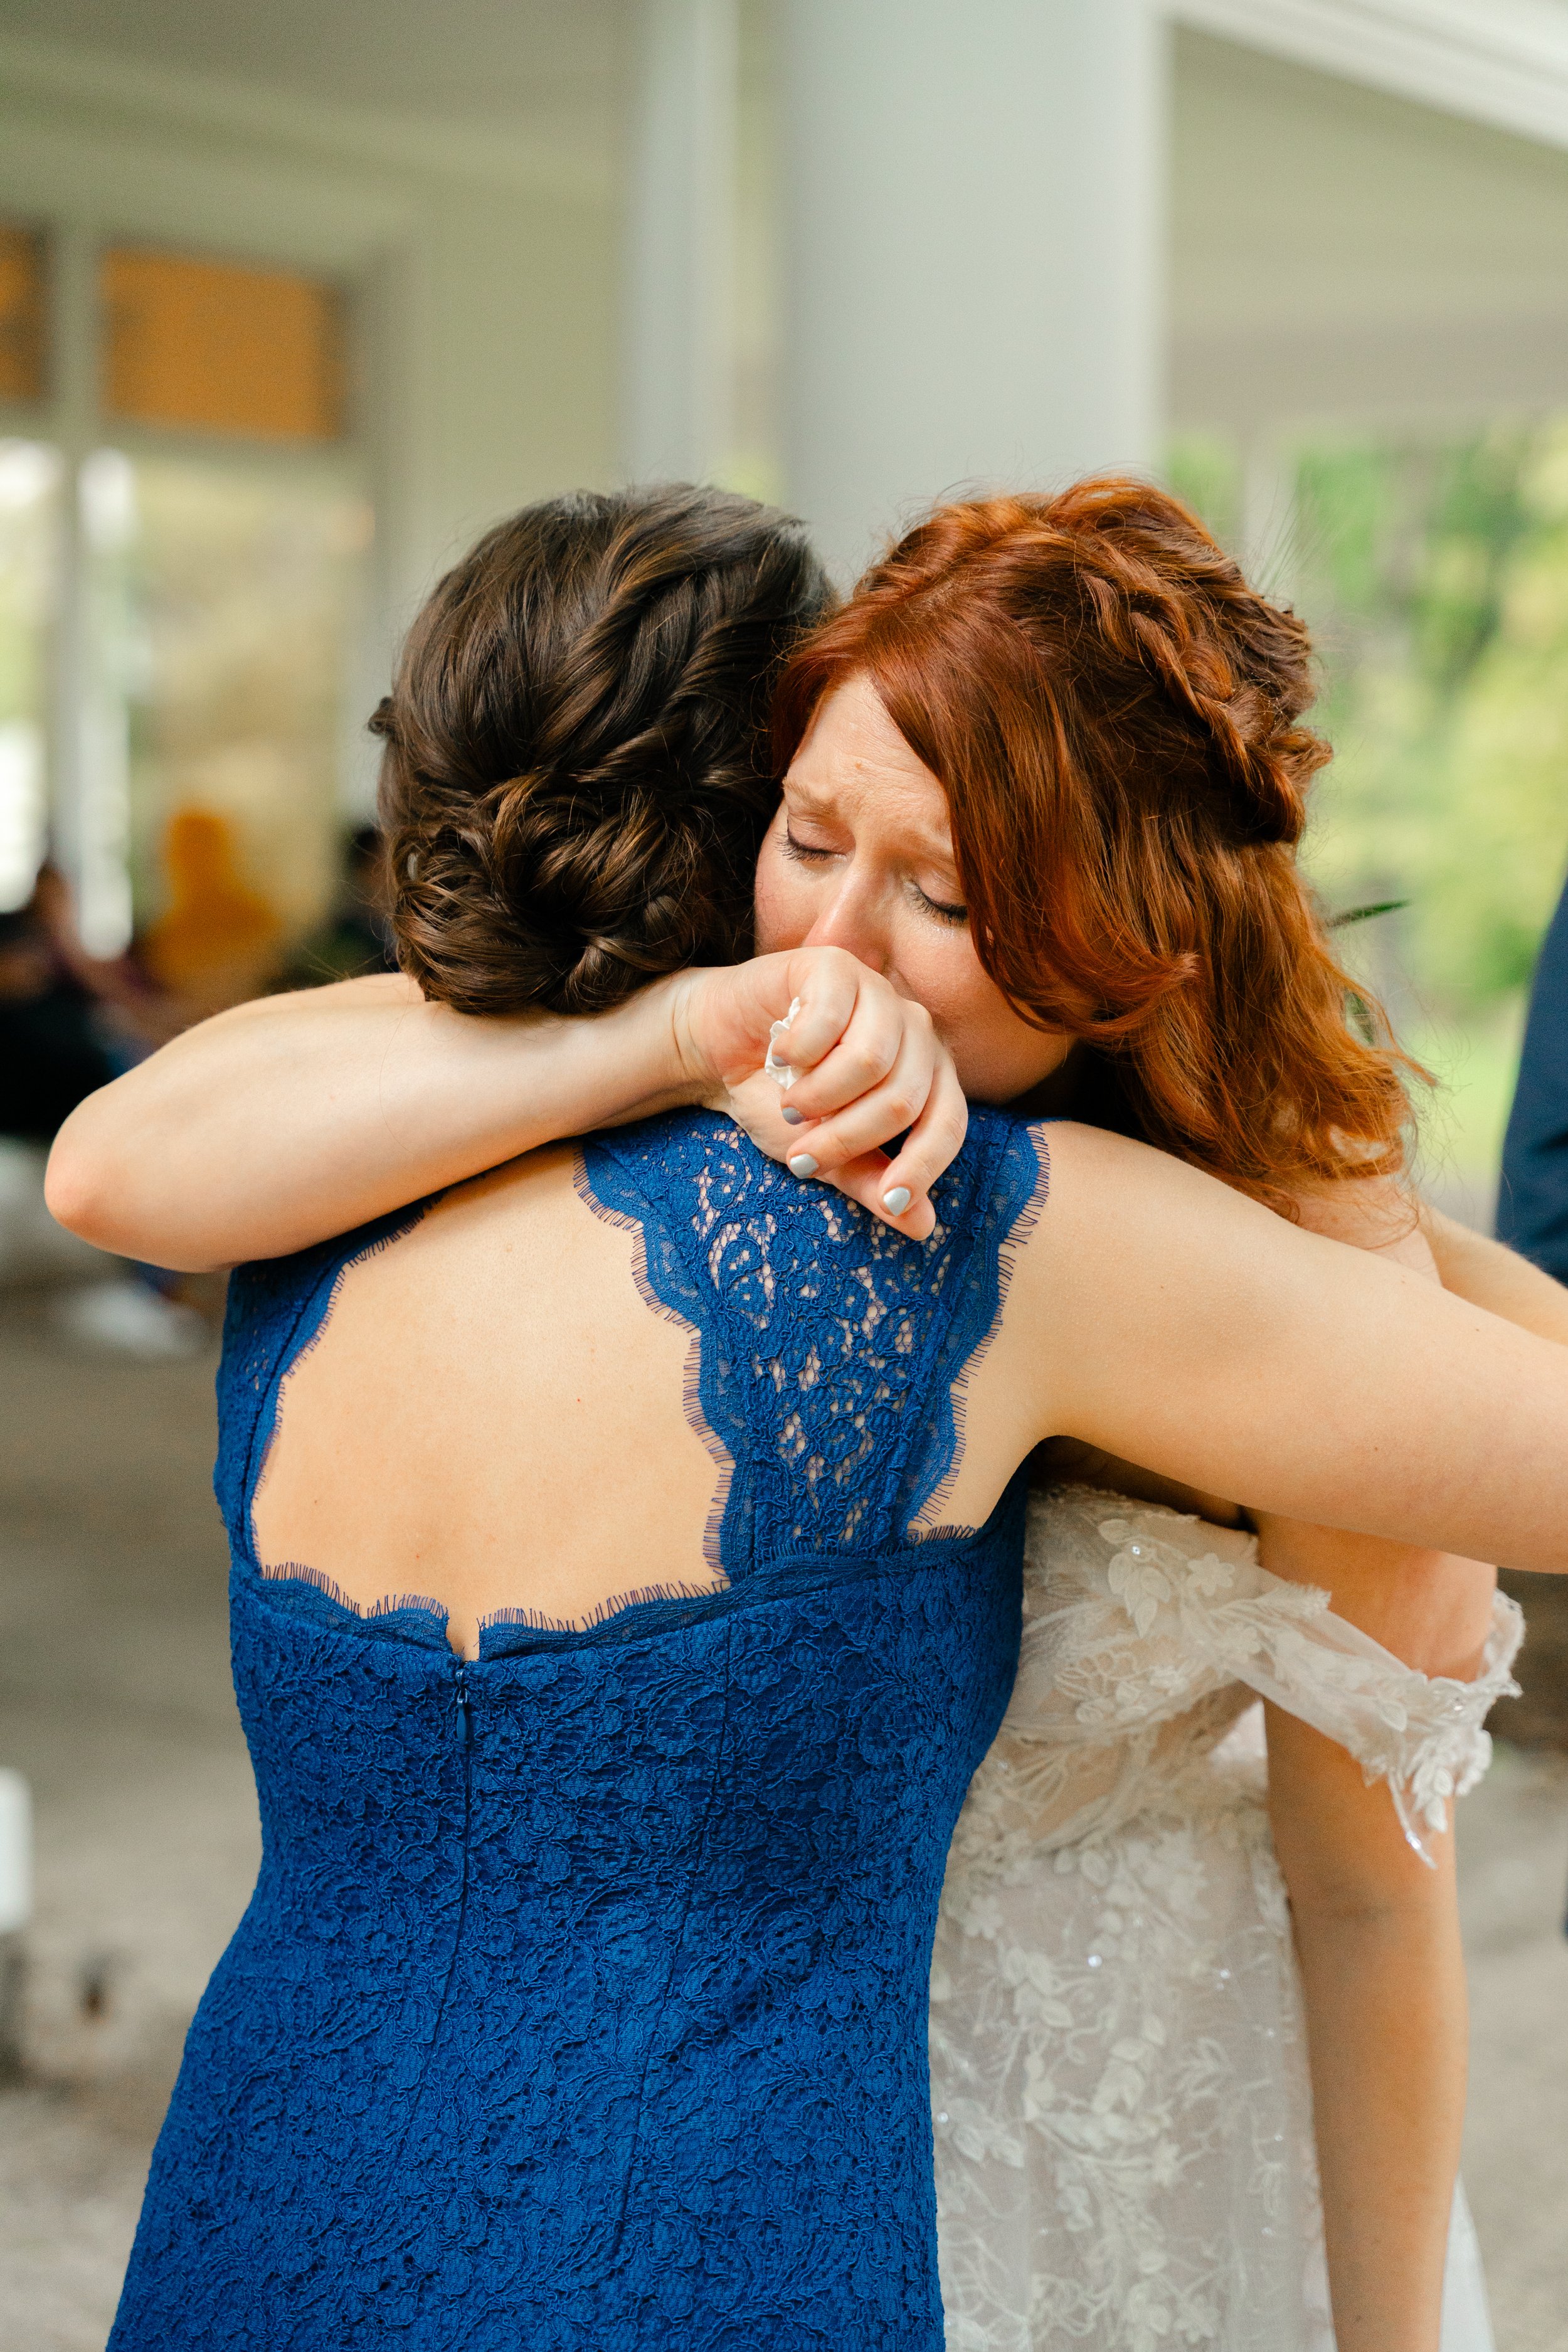 bride shares a heartfelt moment with her bridesmaids on her wedding day in Oconomowoc